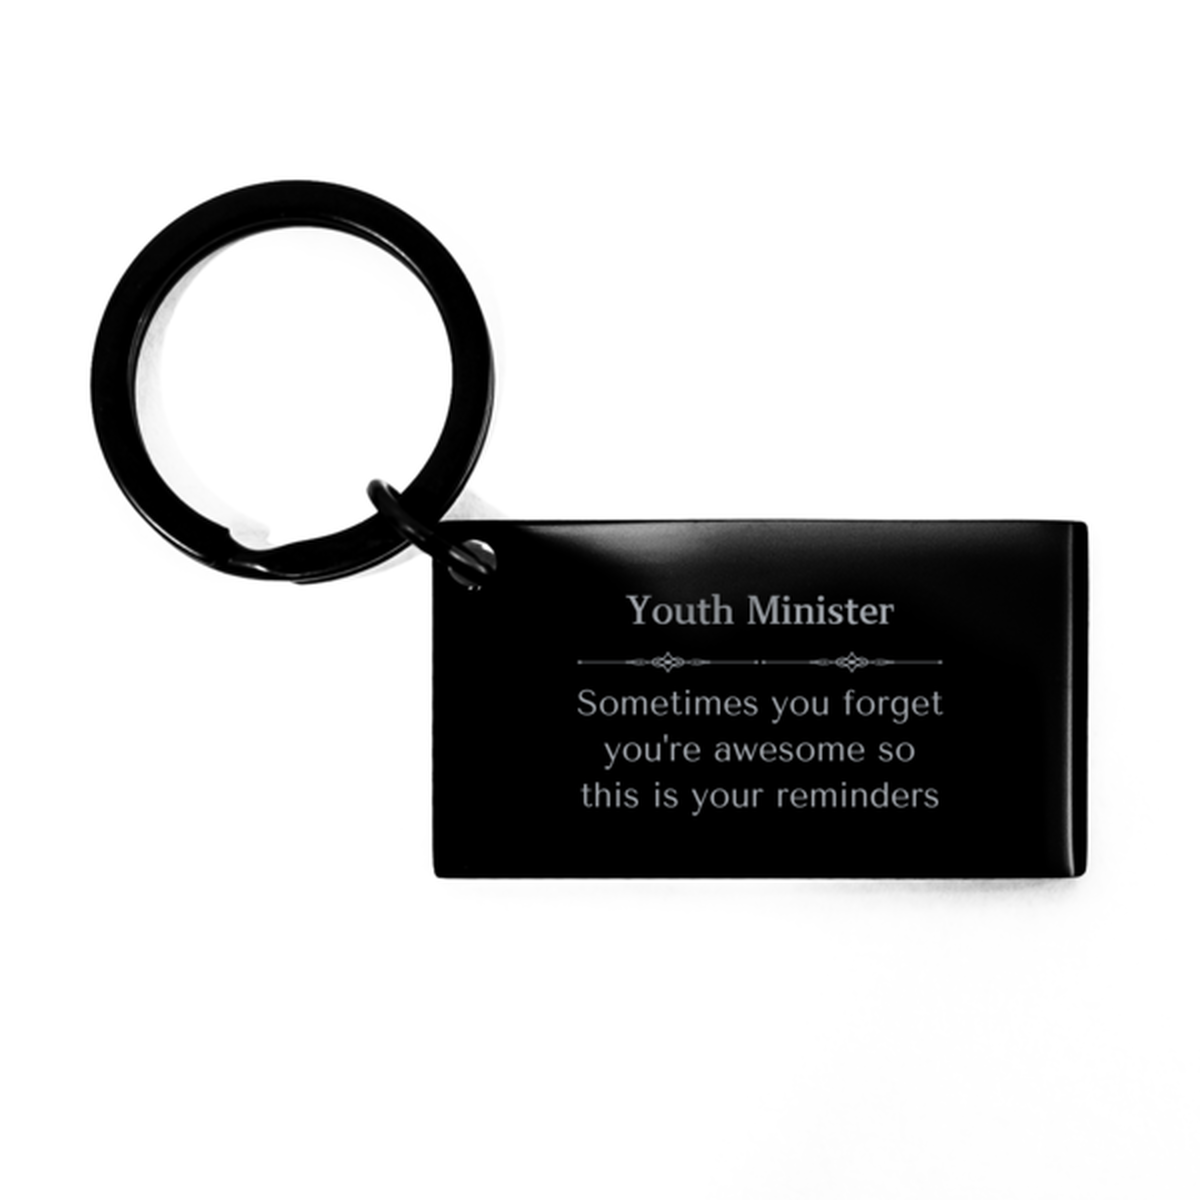 Sentimental Youth Minister Keychain, Bailiff Sometimes you forget you're awesome so this is your reminders, Graduation Christmas Birthday Gifts for Youth Minister, Men, Women, Coworkers